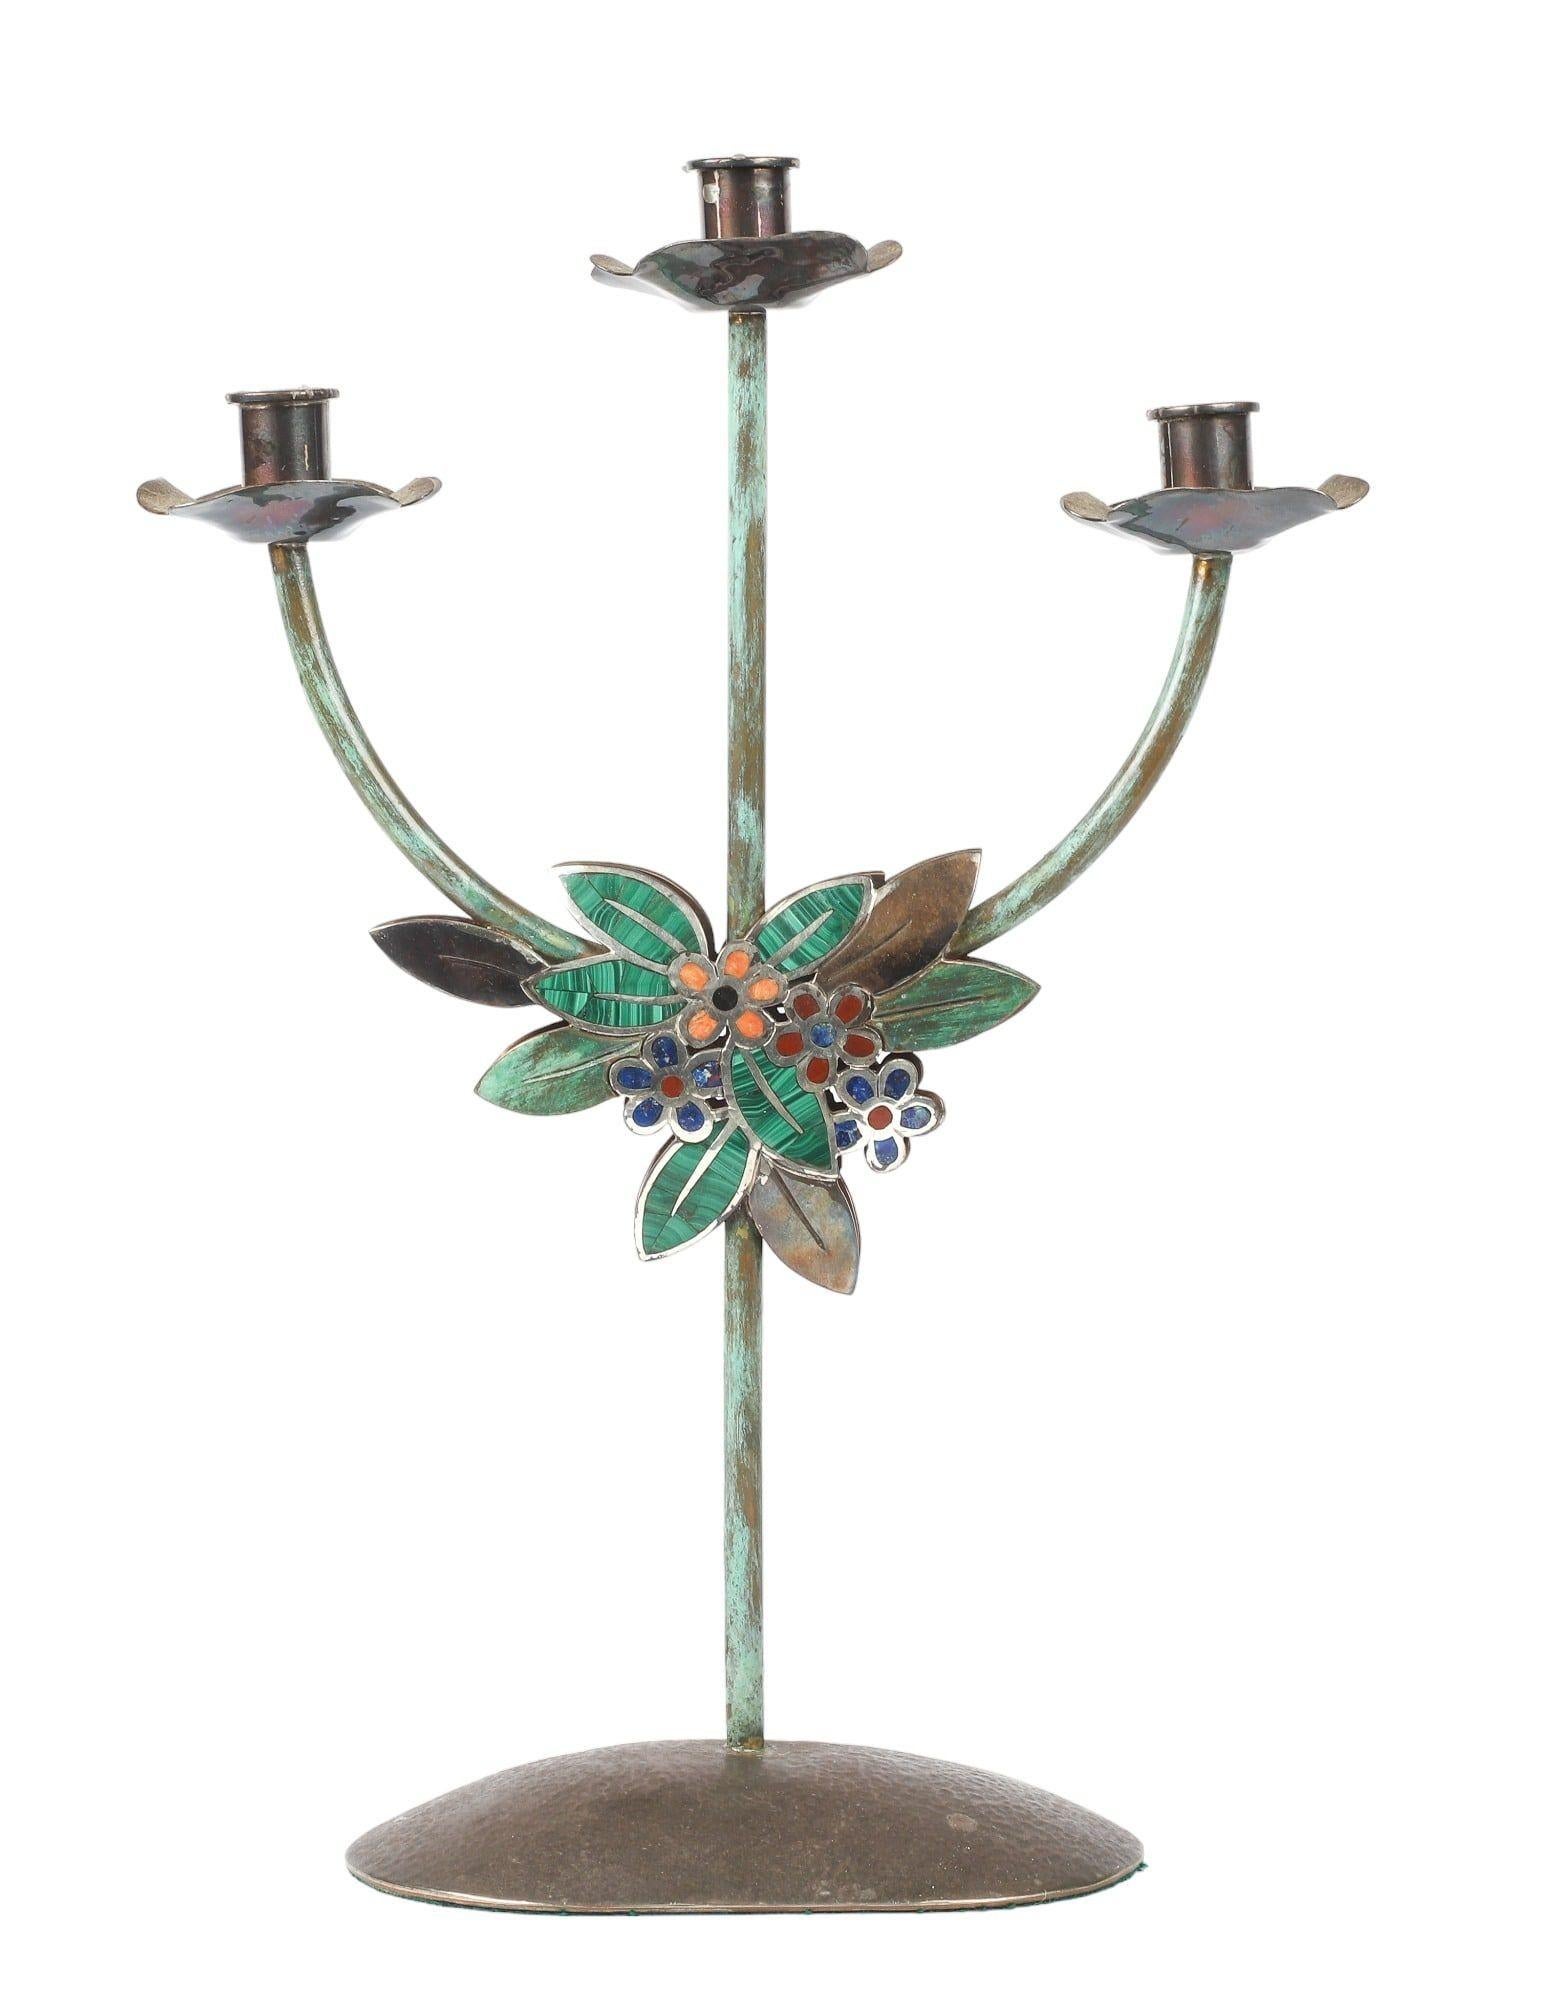 Introducing the exquisite mixed metal & stone candelabra by Emilia Castillo, a true testament to the artistry of Mexican craftsmanship. This stunning piece is a harmonious blend of sterling silver, silver plate, copper, and stone, meticulously